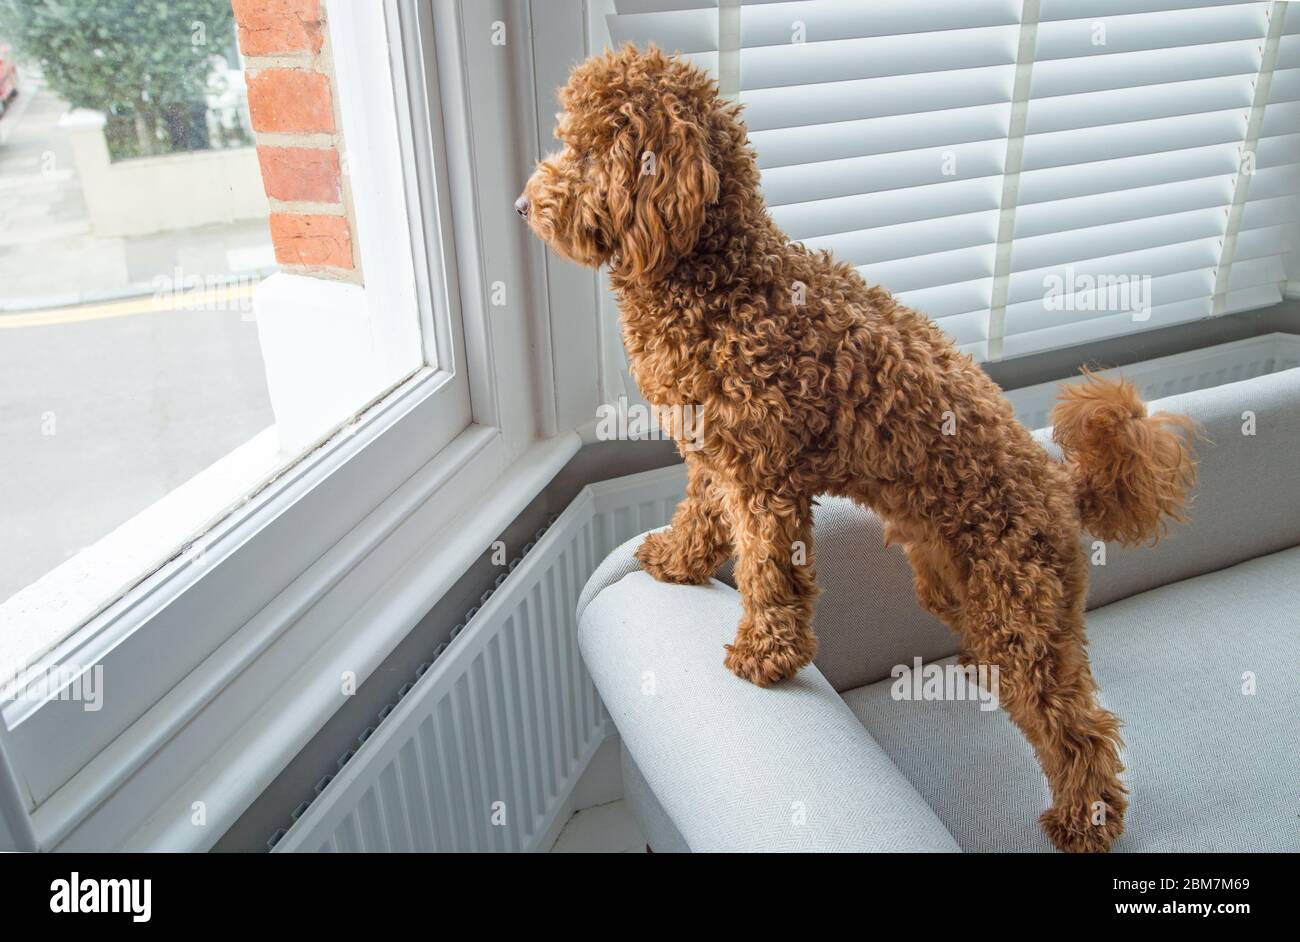 A cut and adorable miniature poodle puppy looks out of a bedroom window in  a smart domestic home interior setting Stock Photo - Alamy